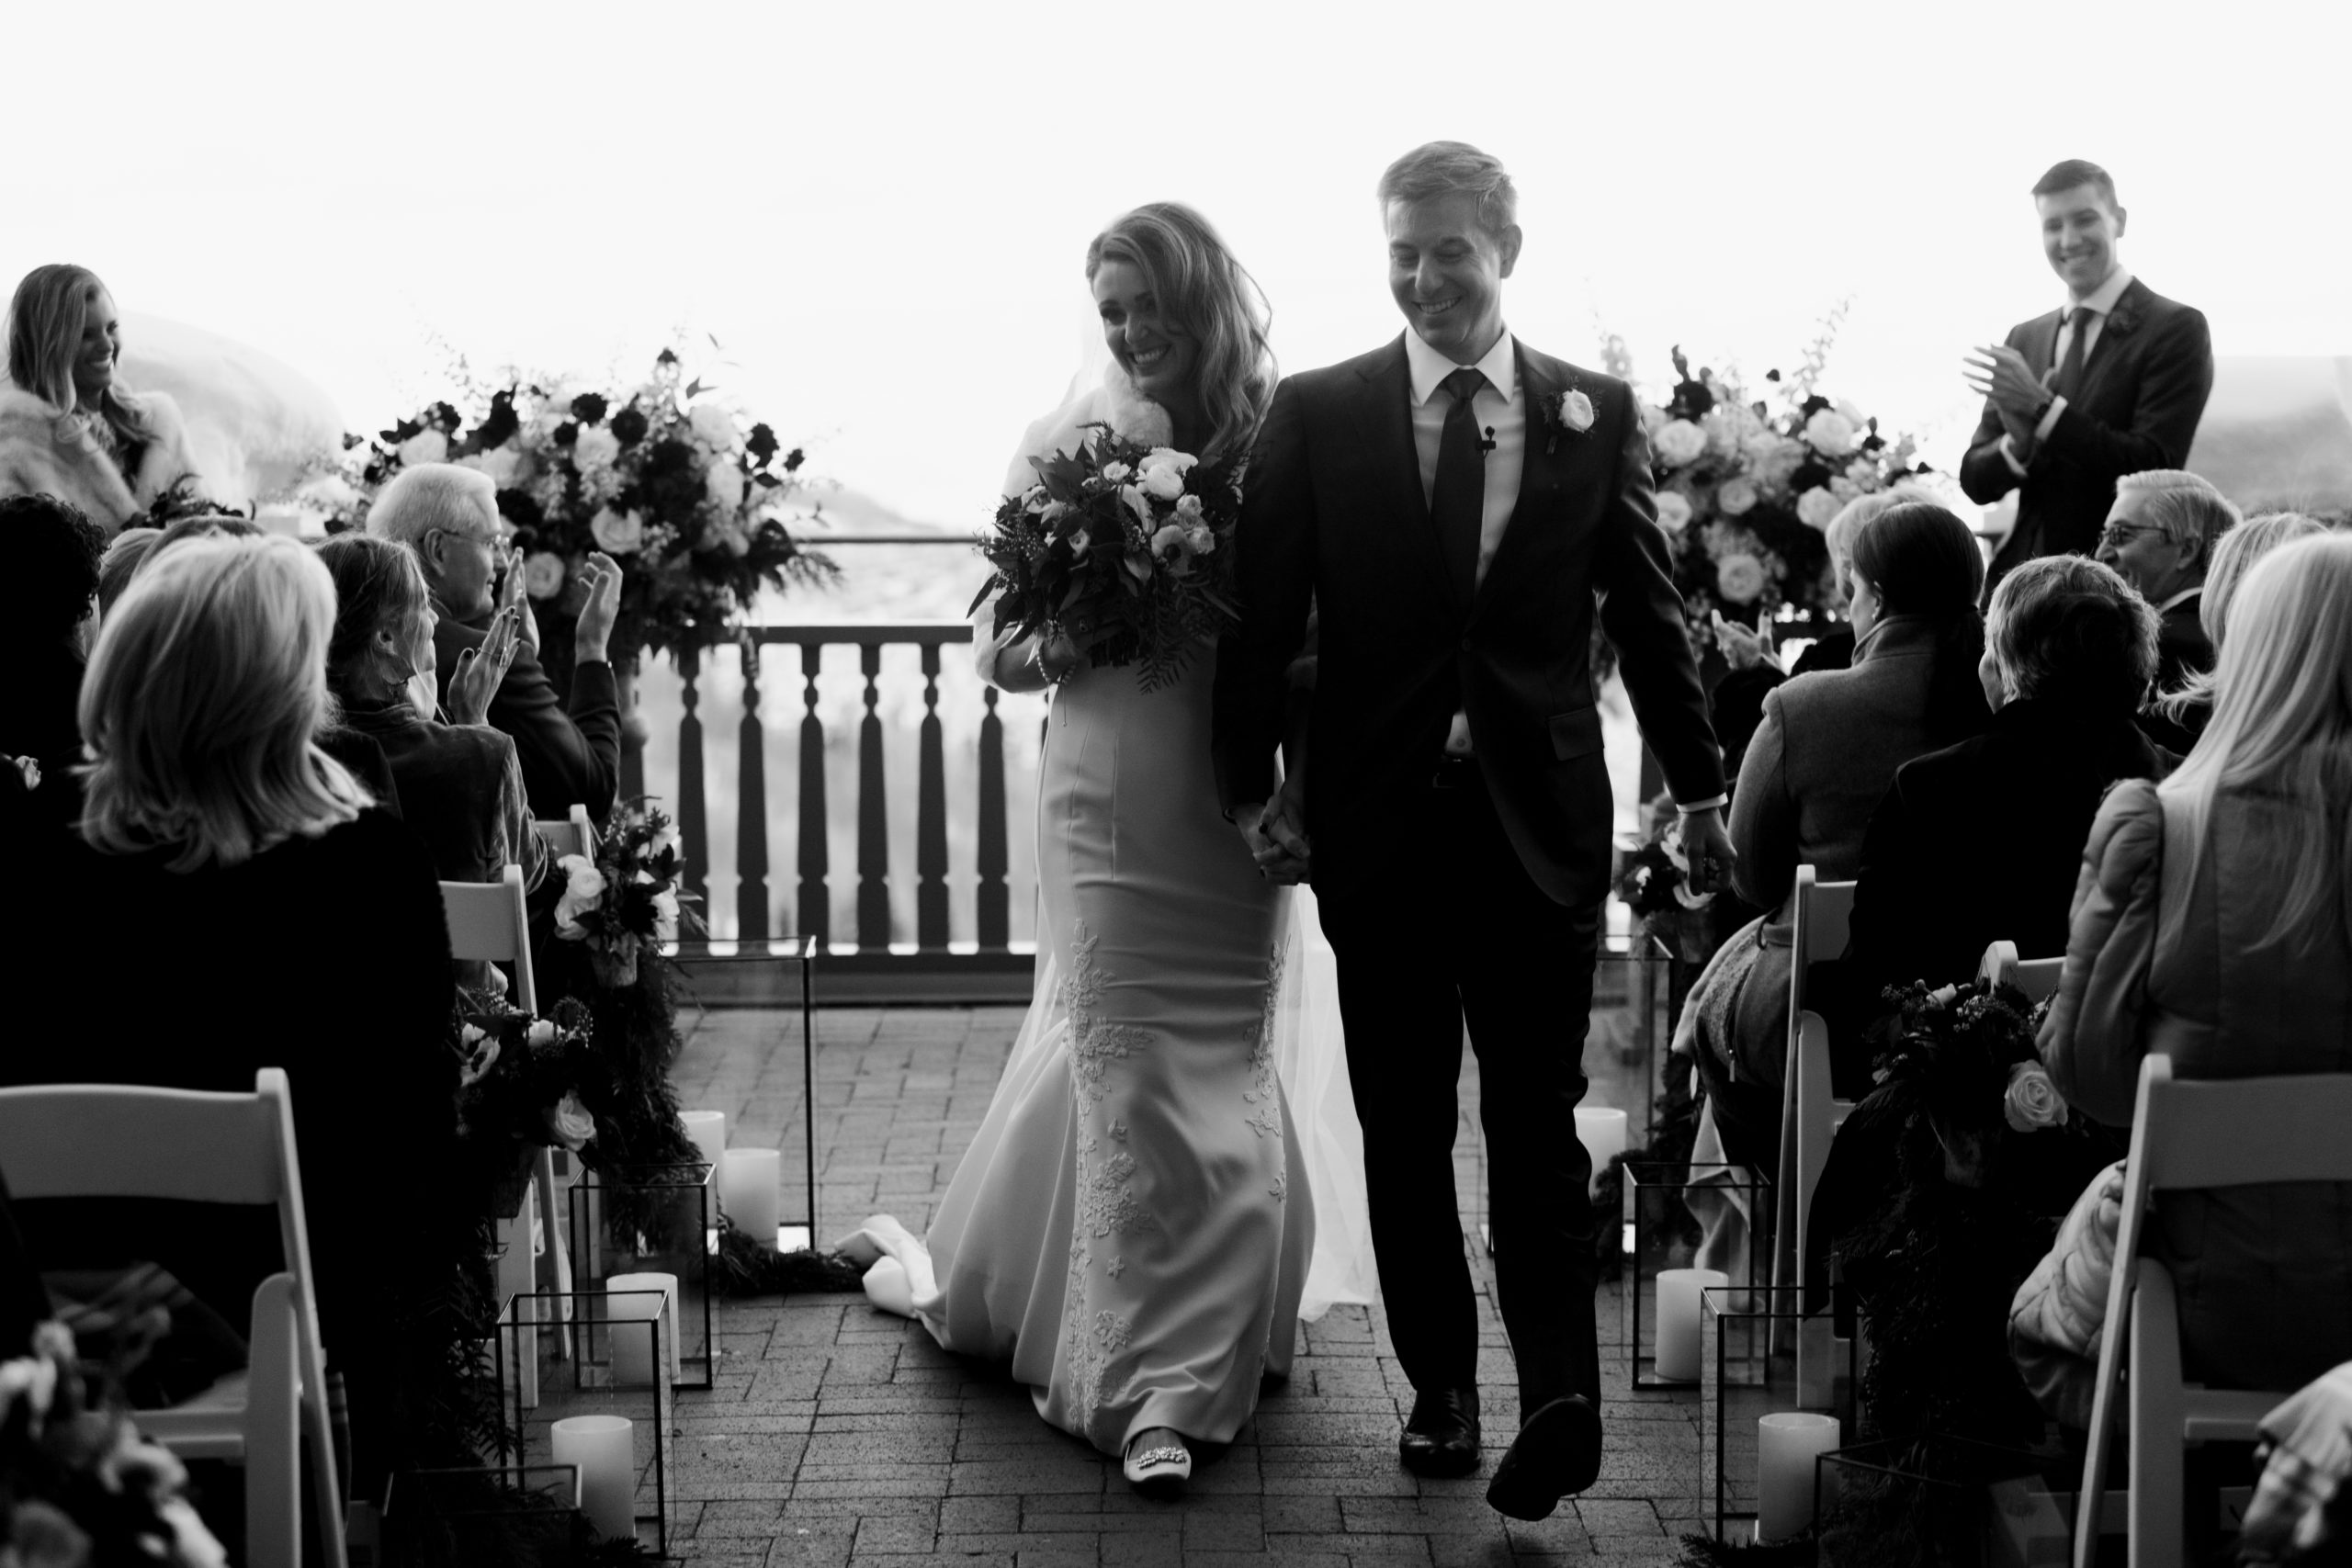 The bride and groom walk down the aisle after their ceremony is finished. This black and white picture captures the couple smiling at the guests. A dream Park City winter wedding.